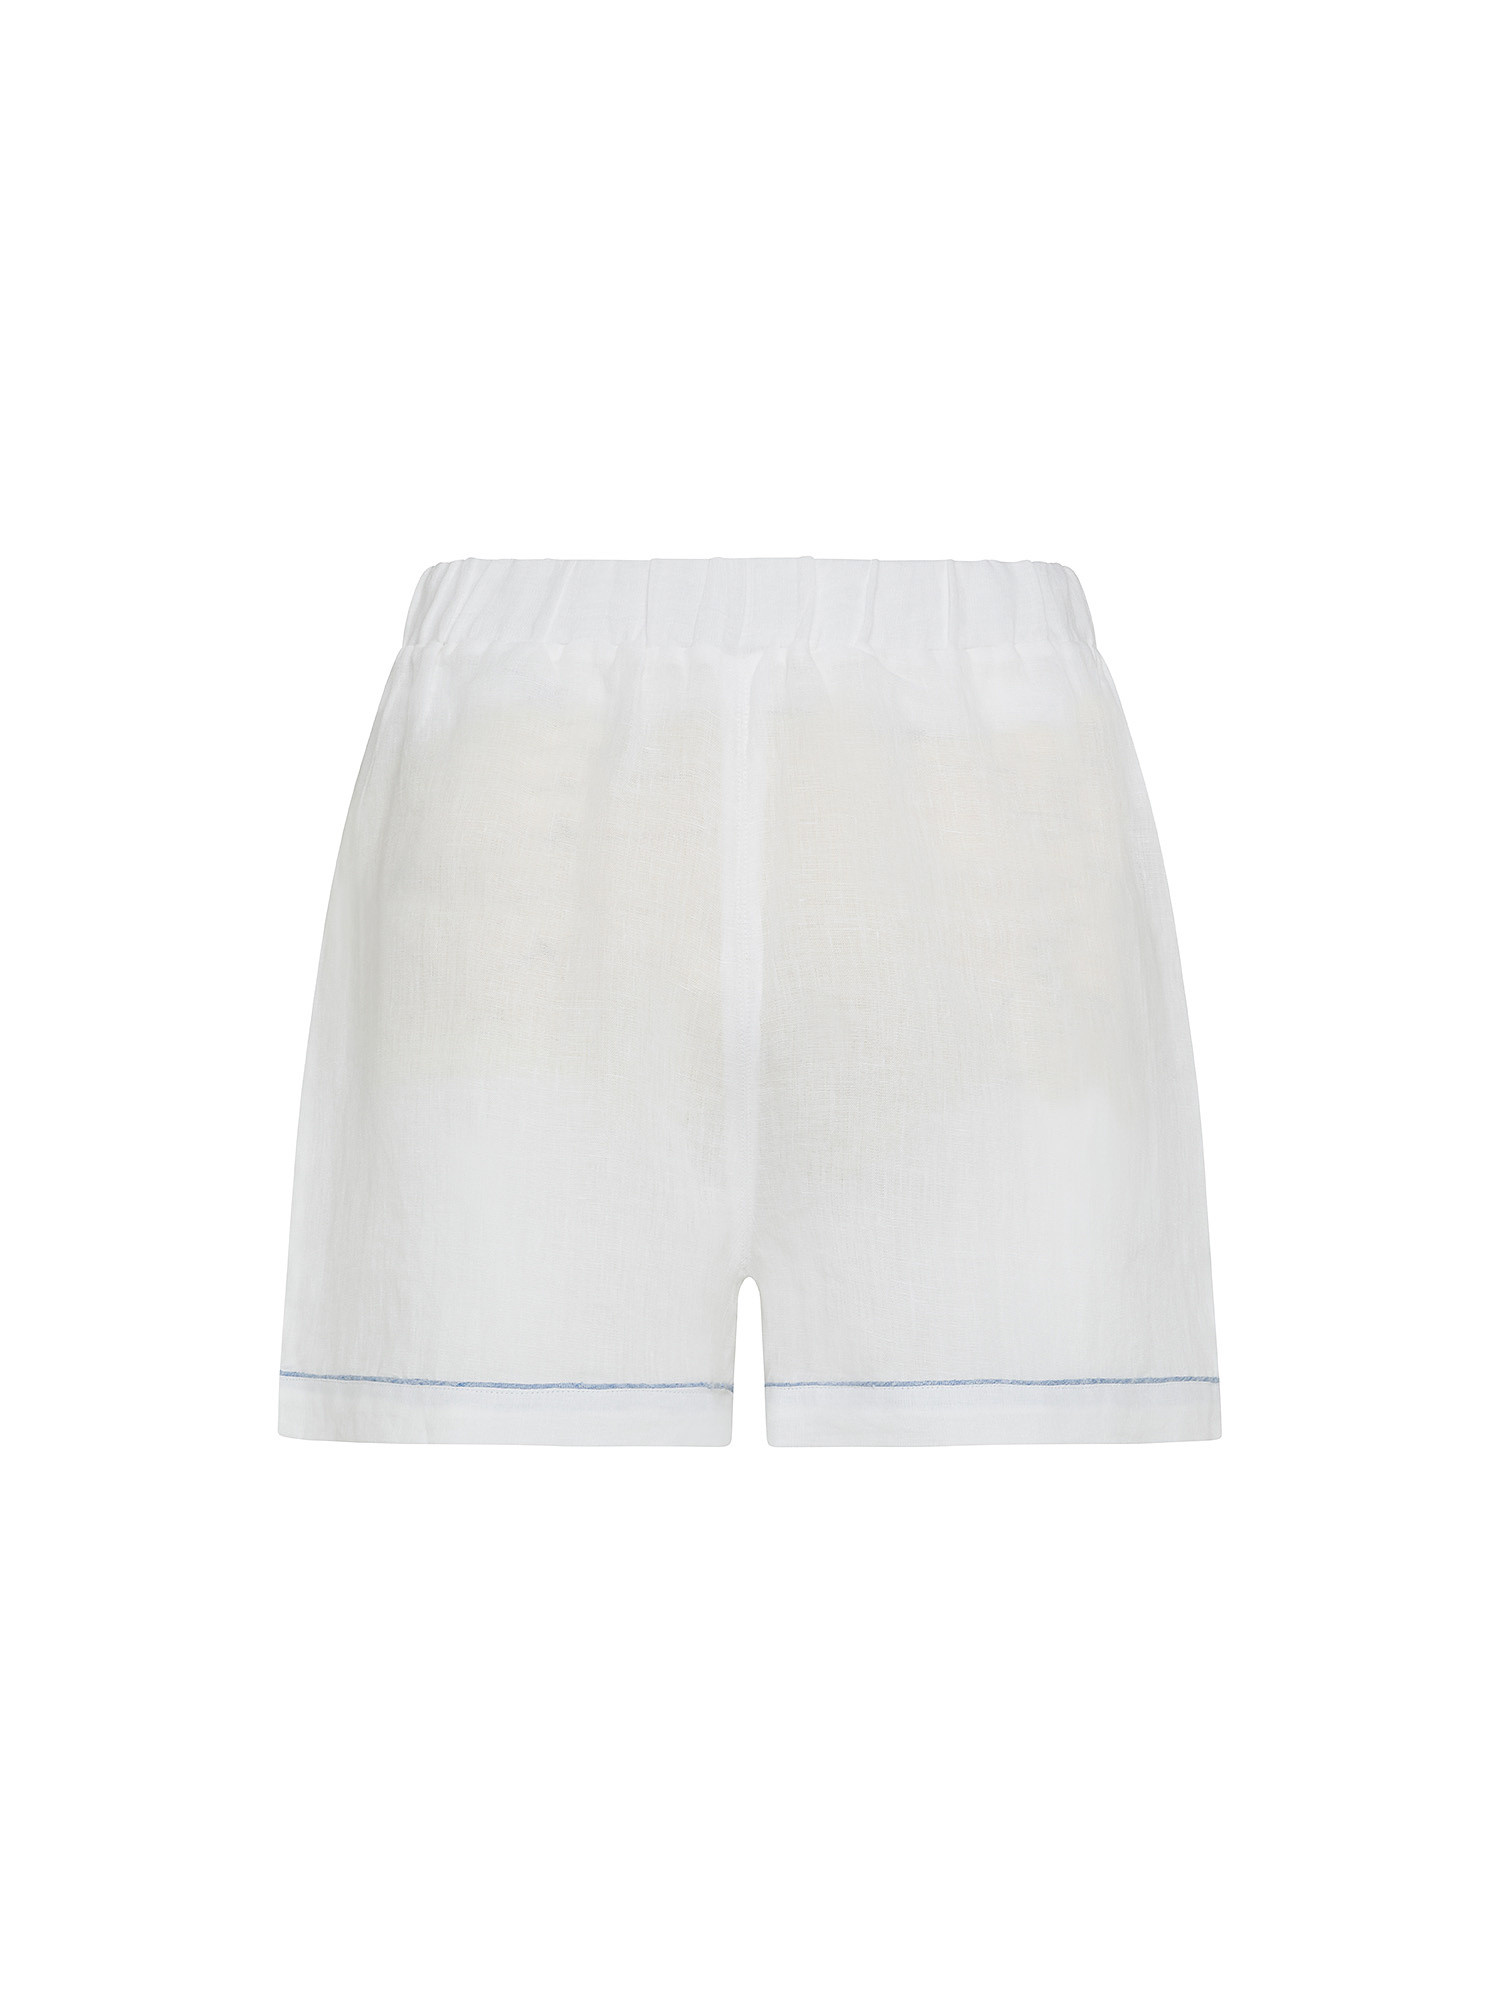 Solid color 100% linen pajama shorts, White, large image number 0